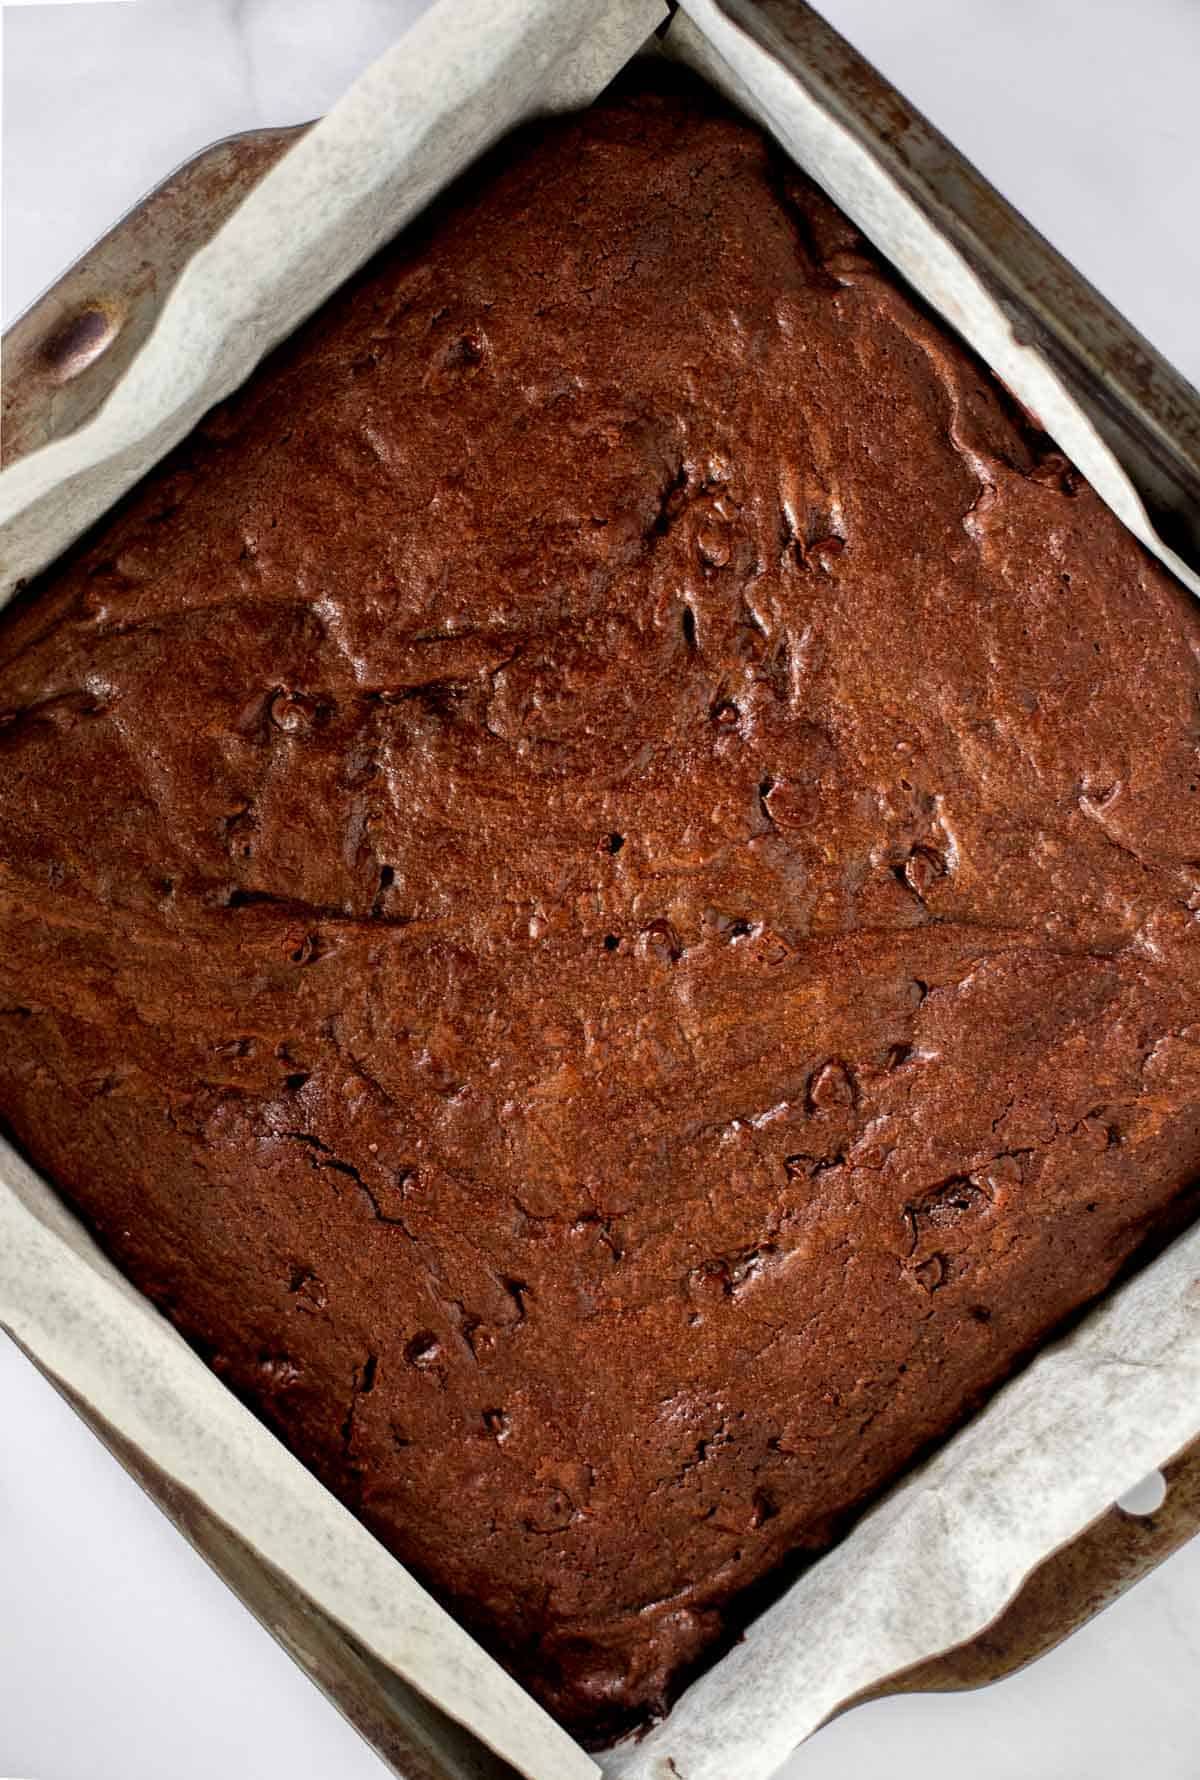 baked brownies in a pan lined with parchment paper.